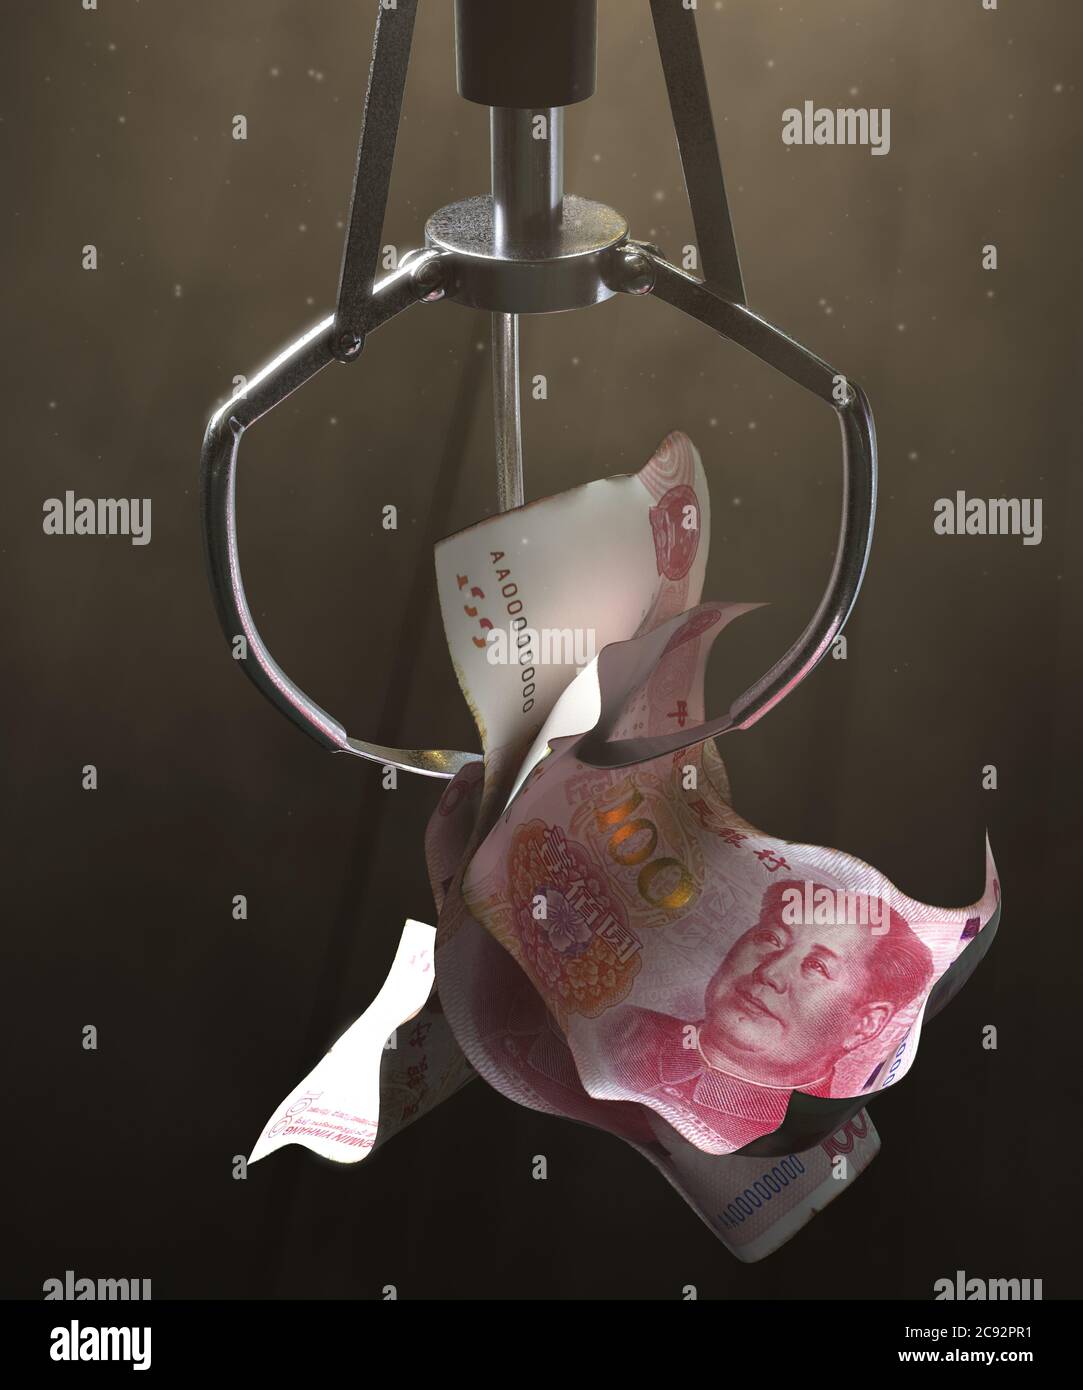 A robotic claw from an arcade type game gripping a wad of creased chinese yuan banknotes on a dark moody background - 3D render Stock Photo